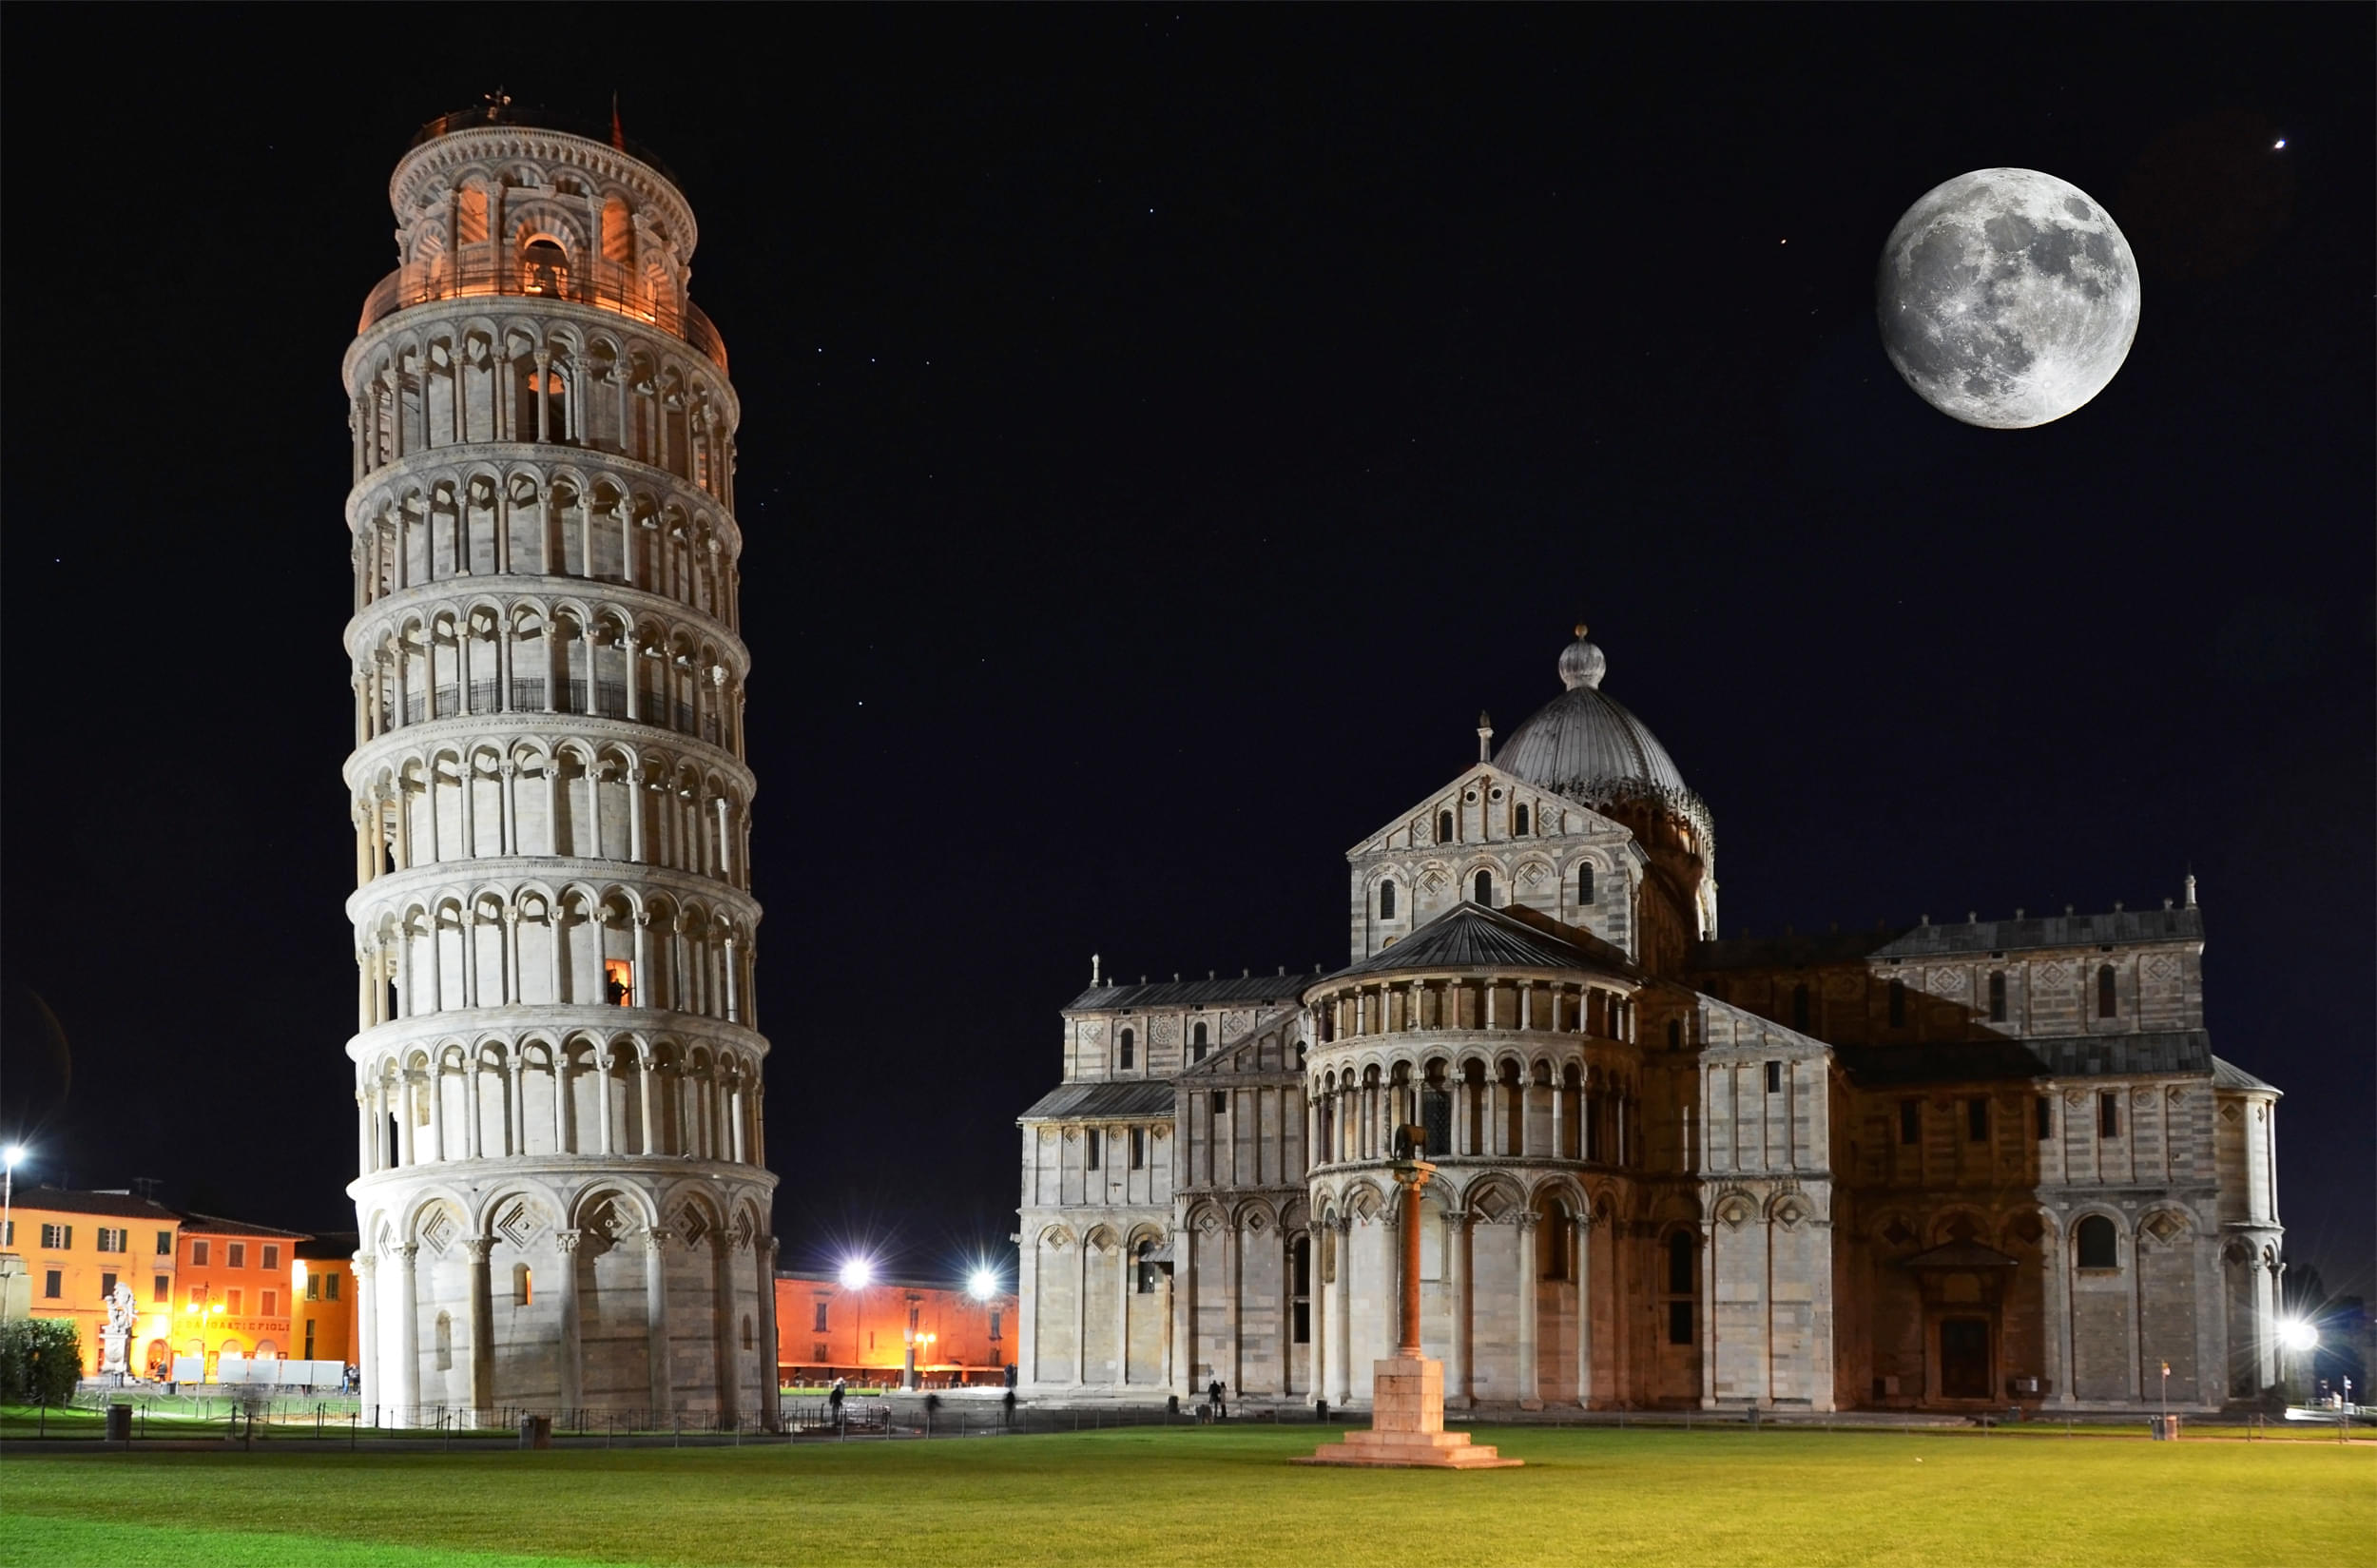 Leaning Tower of Pisa at Night 